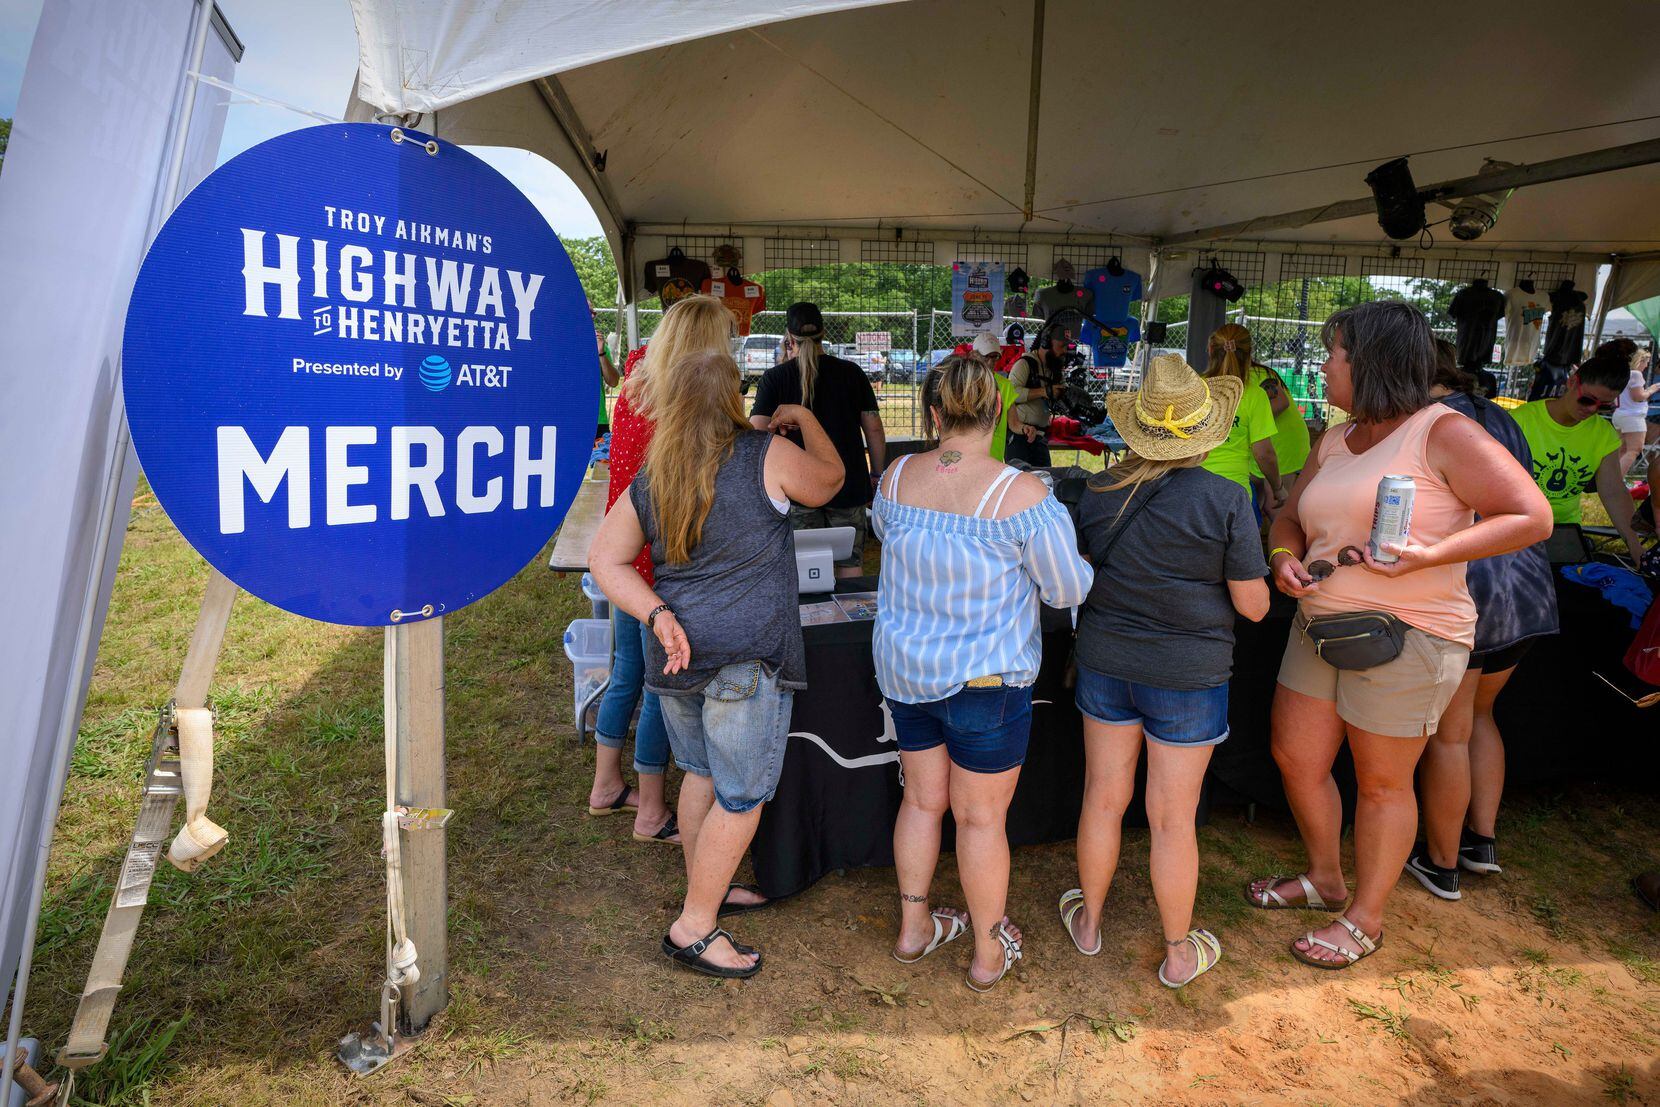 Fans worked to stay cool at the Highway to Henryetta concert in Henryetta, Okla., on Saturday.